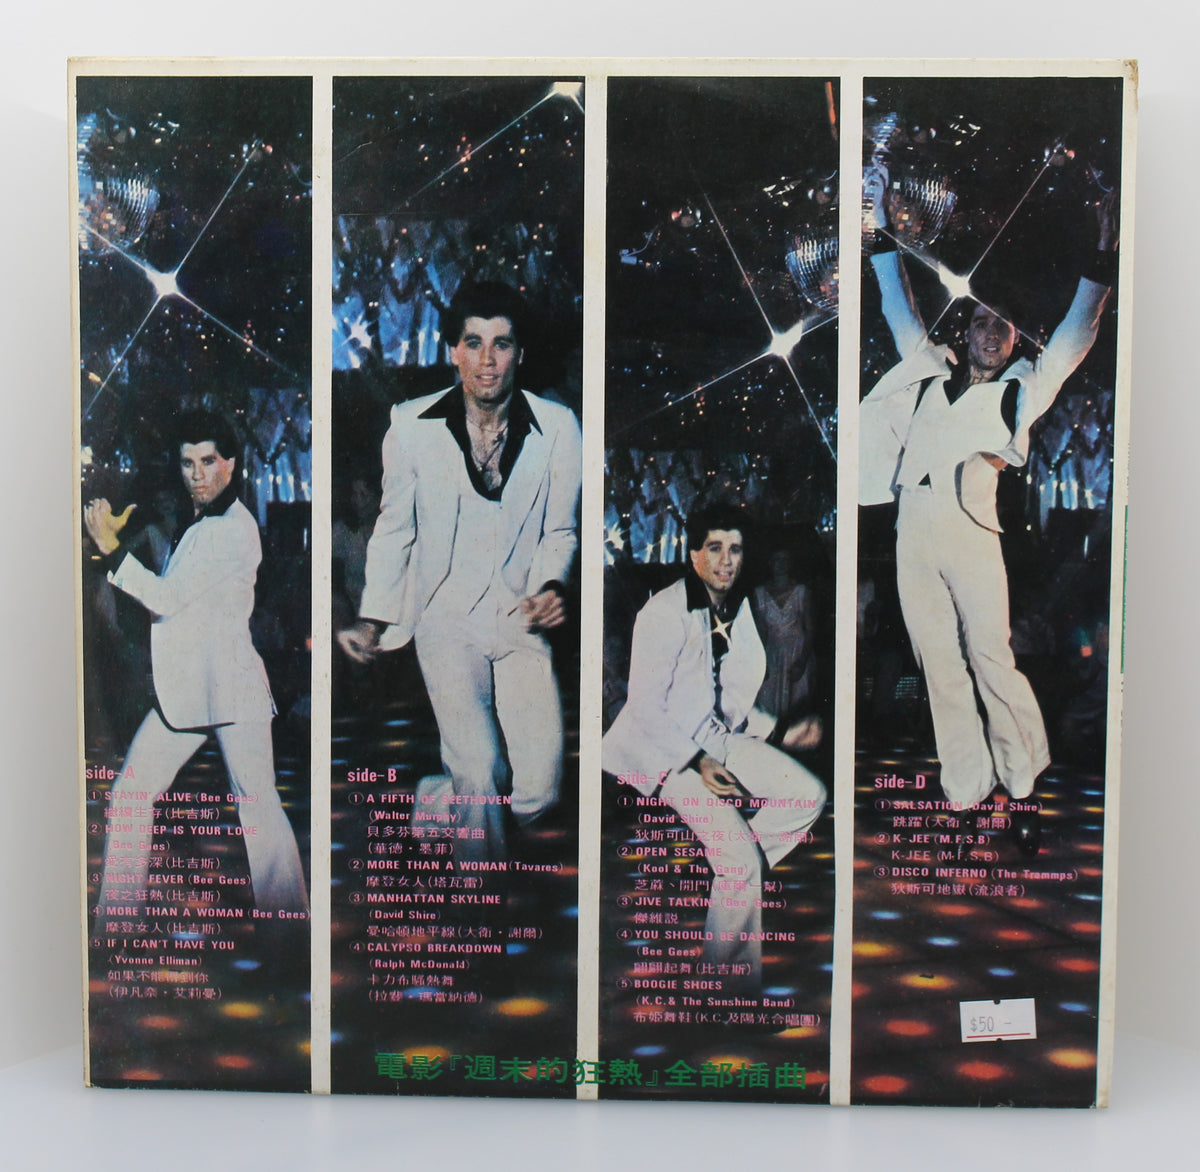 Bee Gees - Various – Saturday Night Fever, 2 x Vinyl, LP, Album, Unofficial Release, Stereo, Taiwan 1977